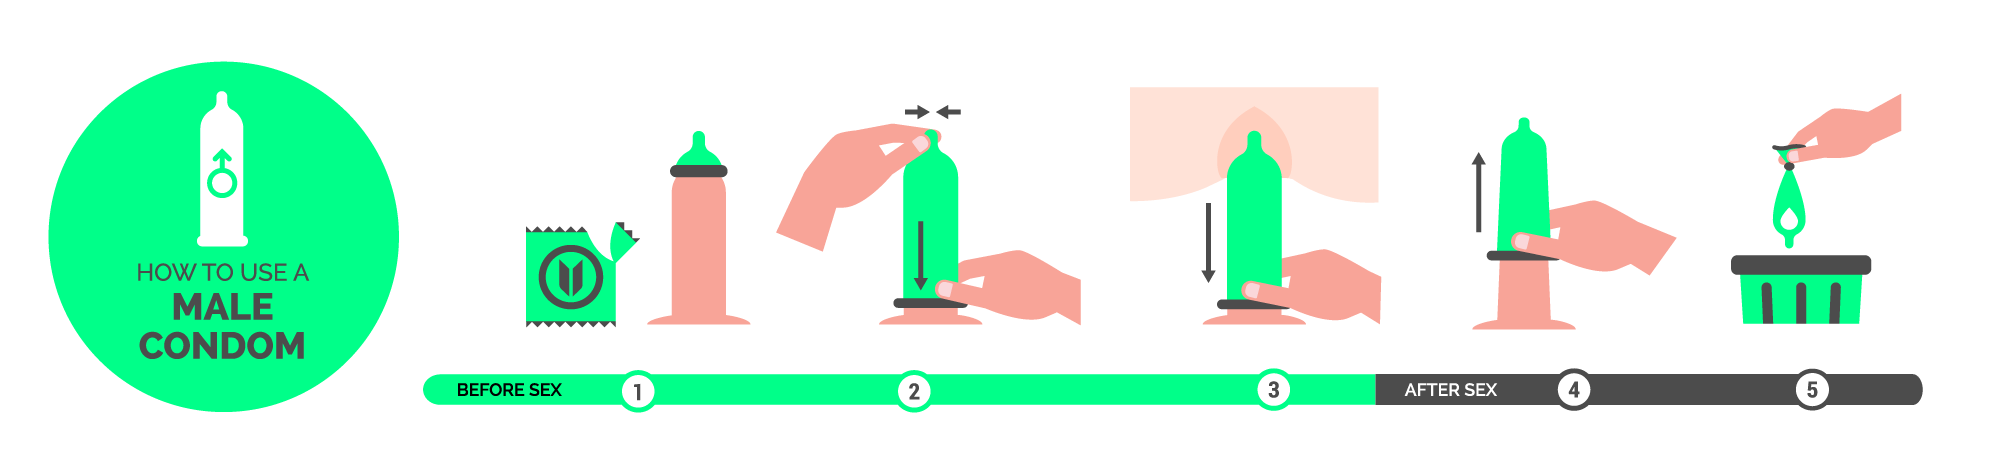 Step by step picture guide to putting on a male condom.